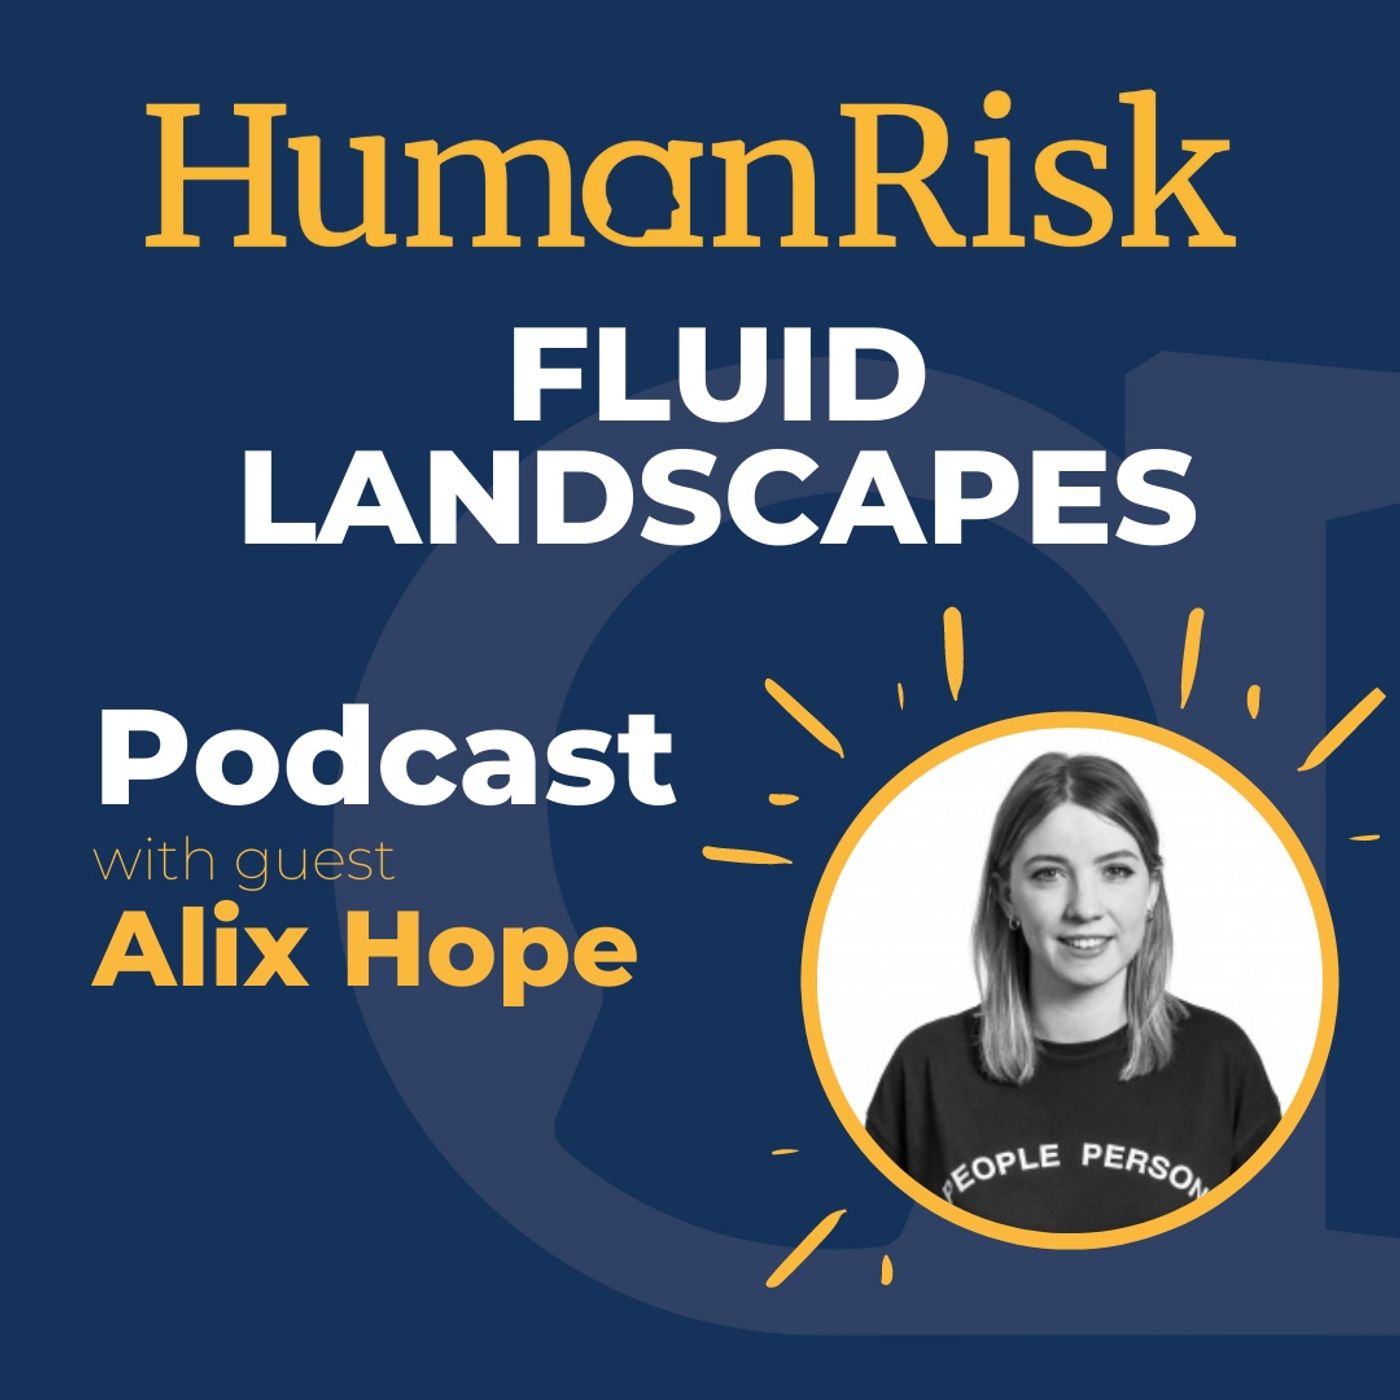 Alix Hope on Fluid Landscapes & how Taste Architecture can impact our perception